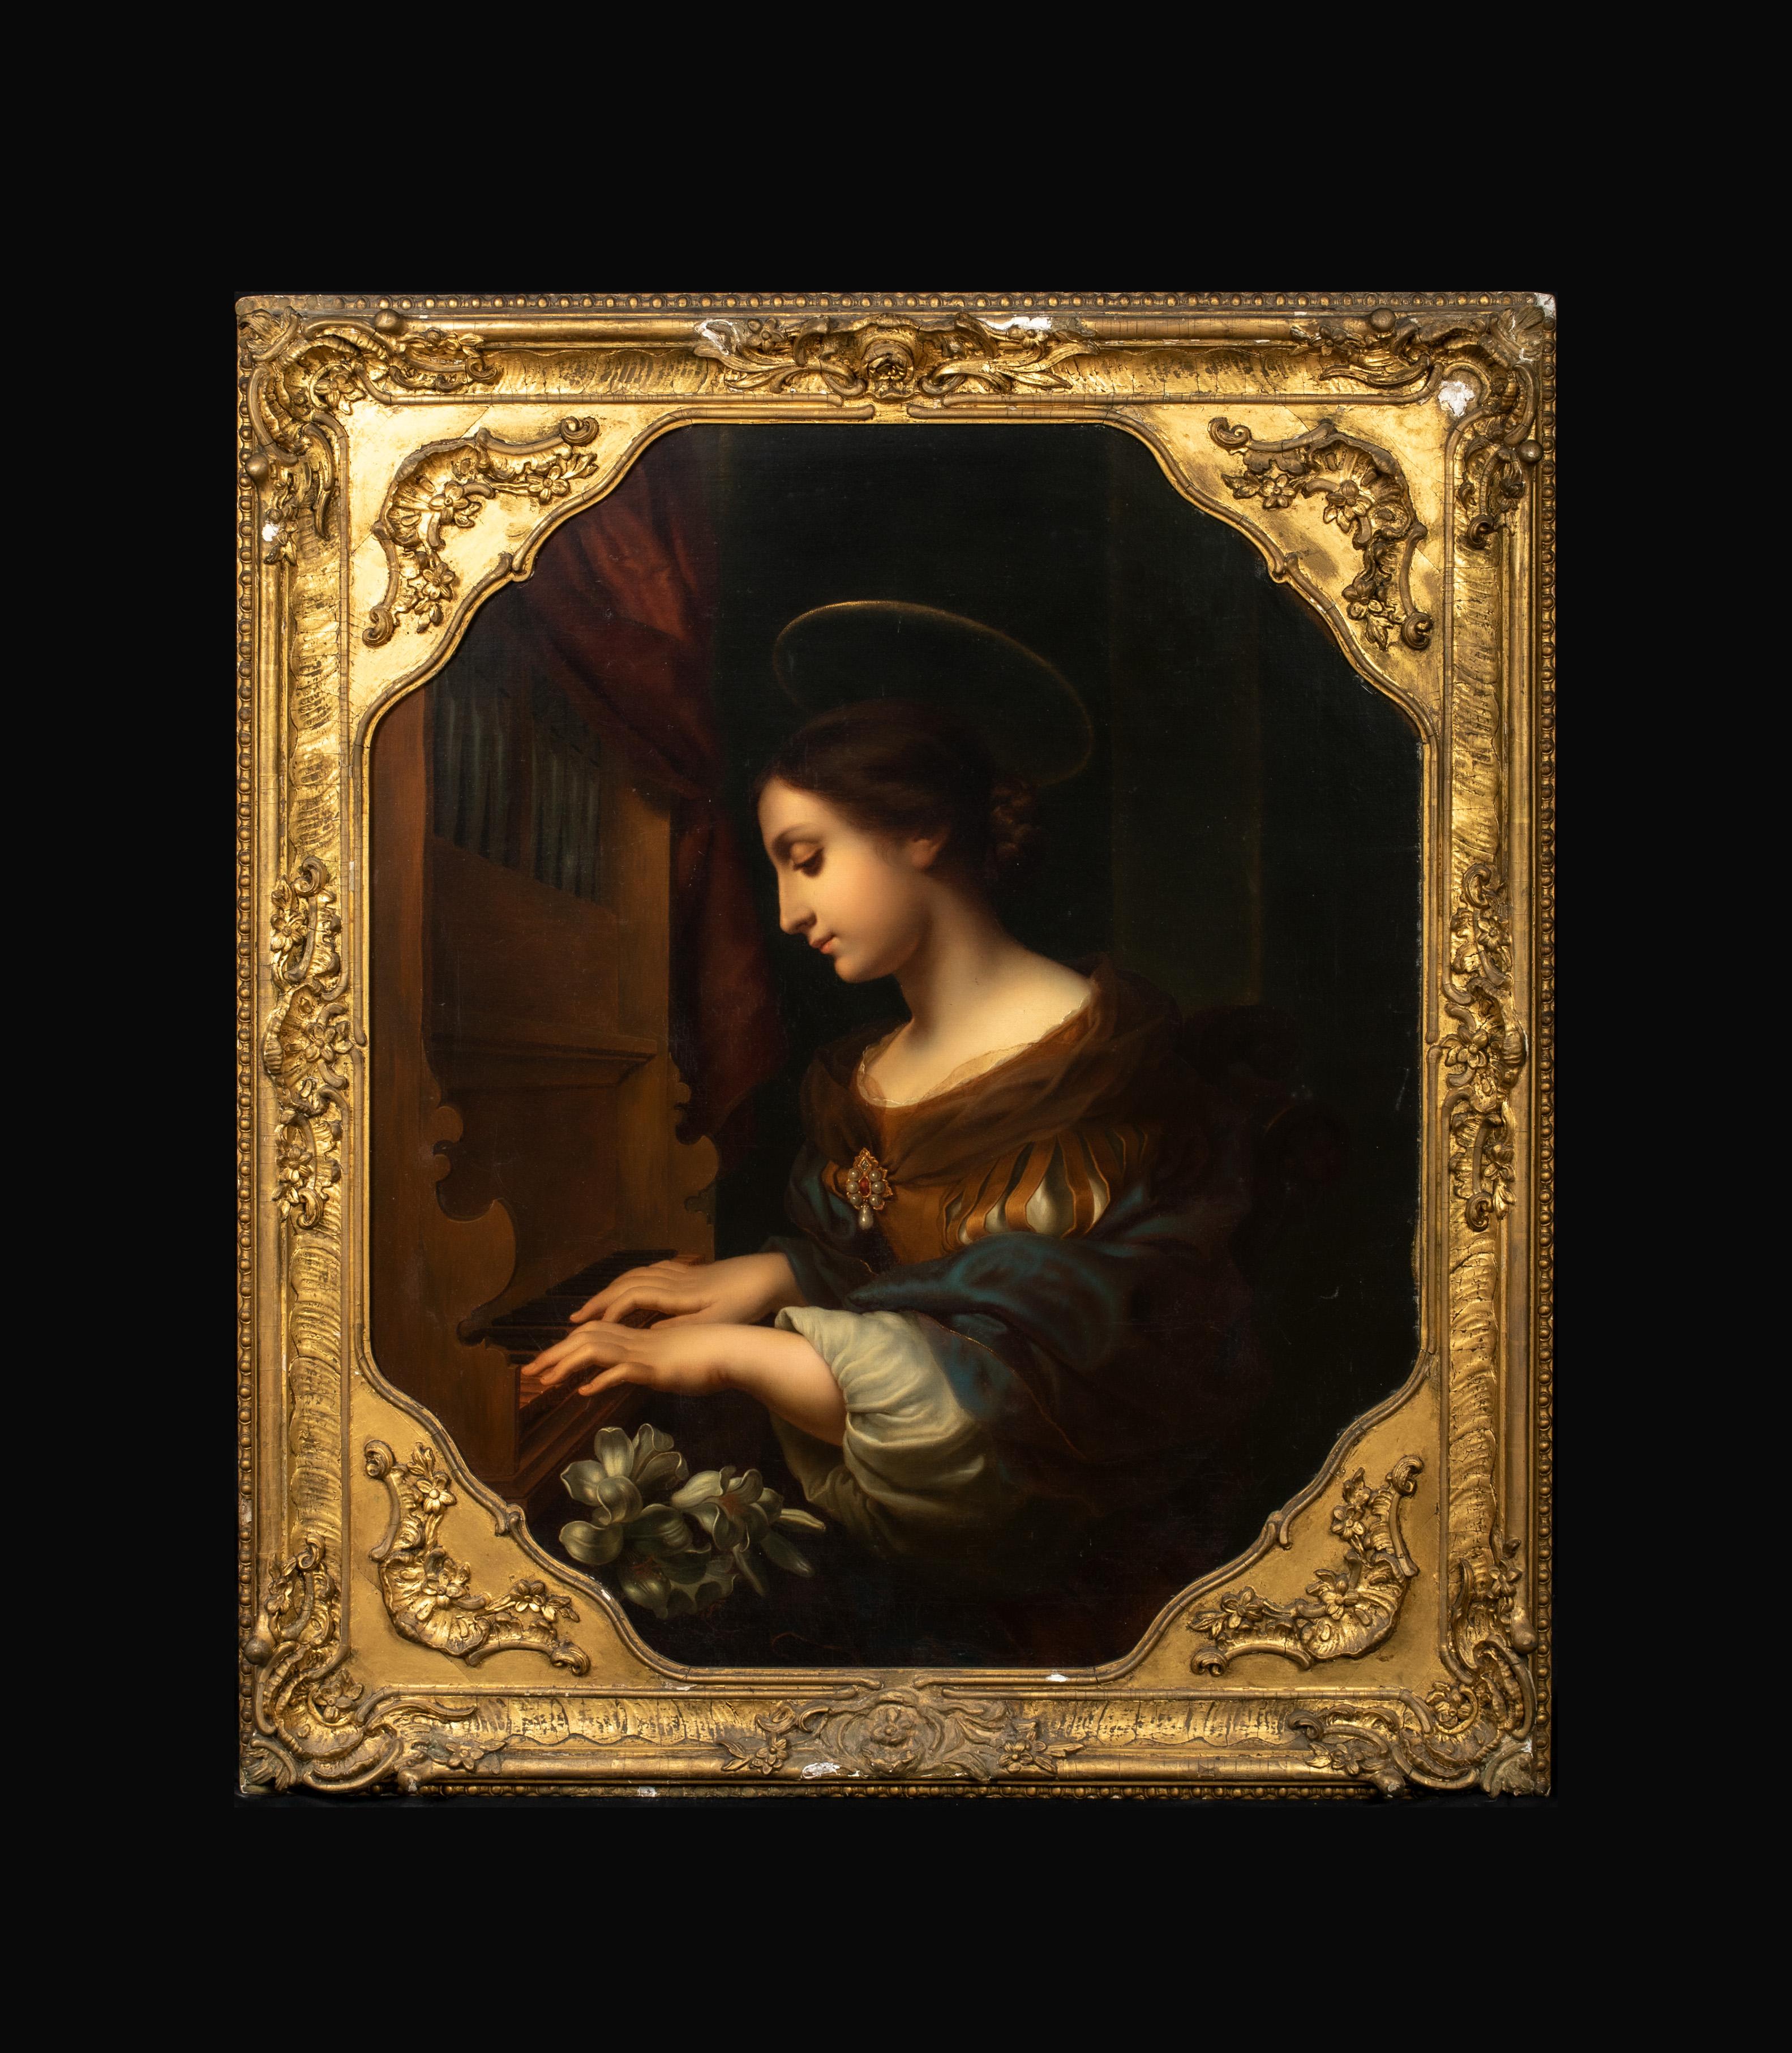 Saint Cecilia Playing The Piano, 17th Century - Painting by Carlo Dolci